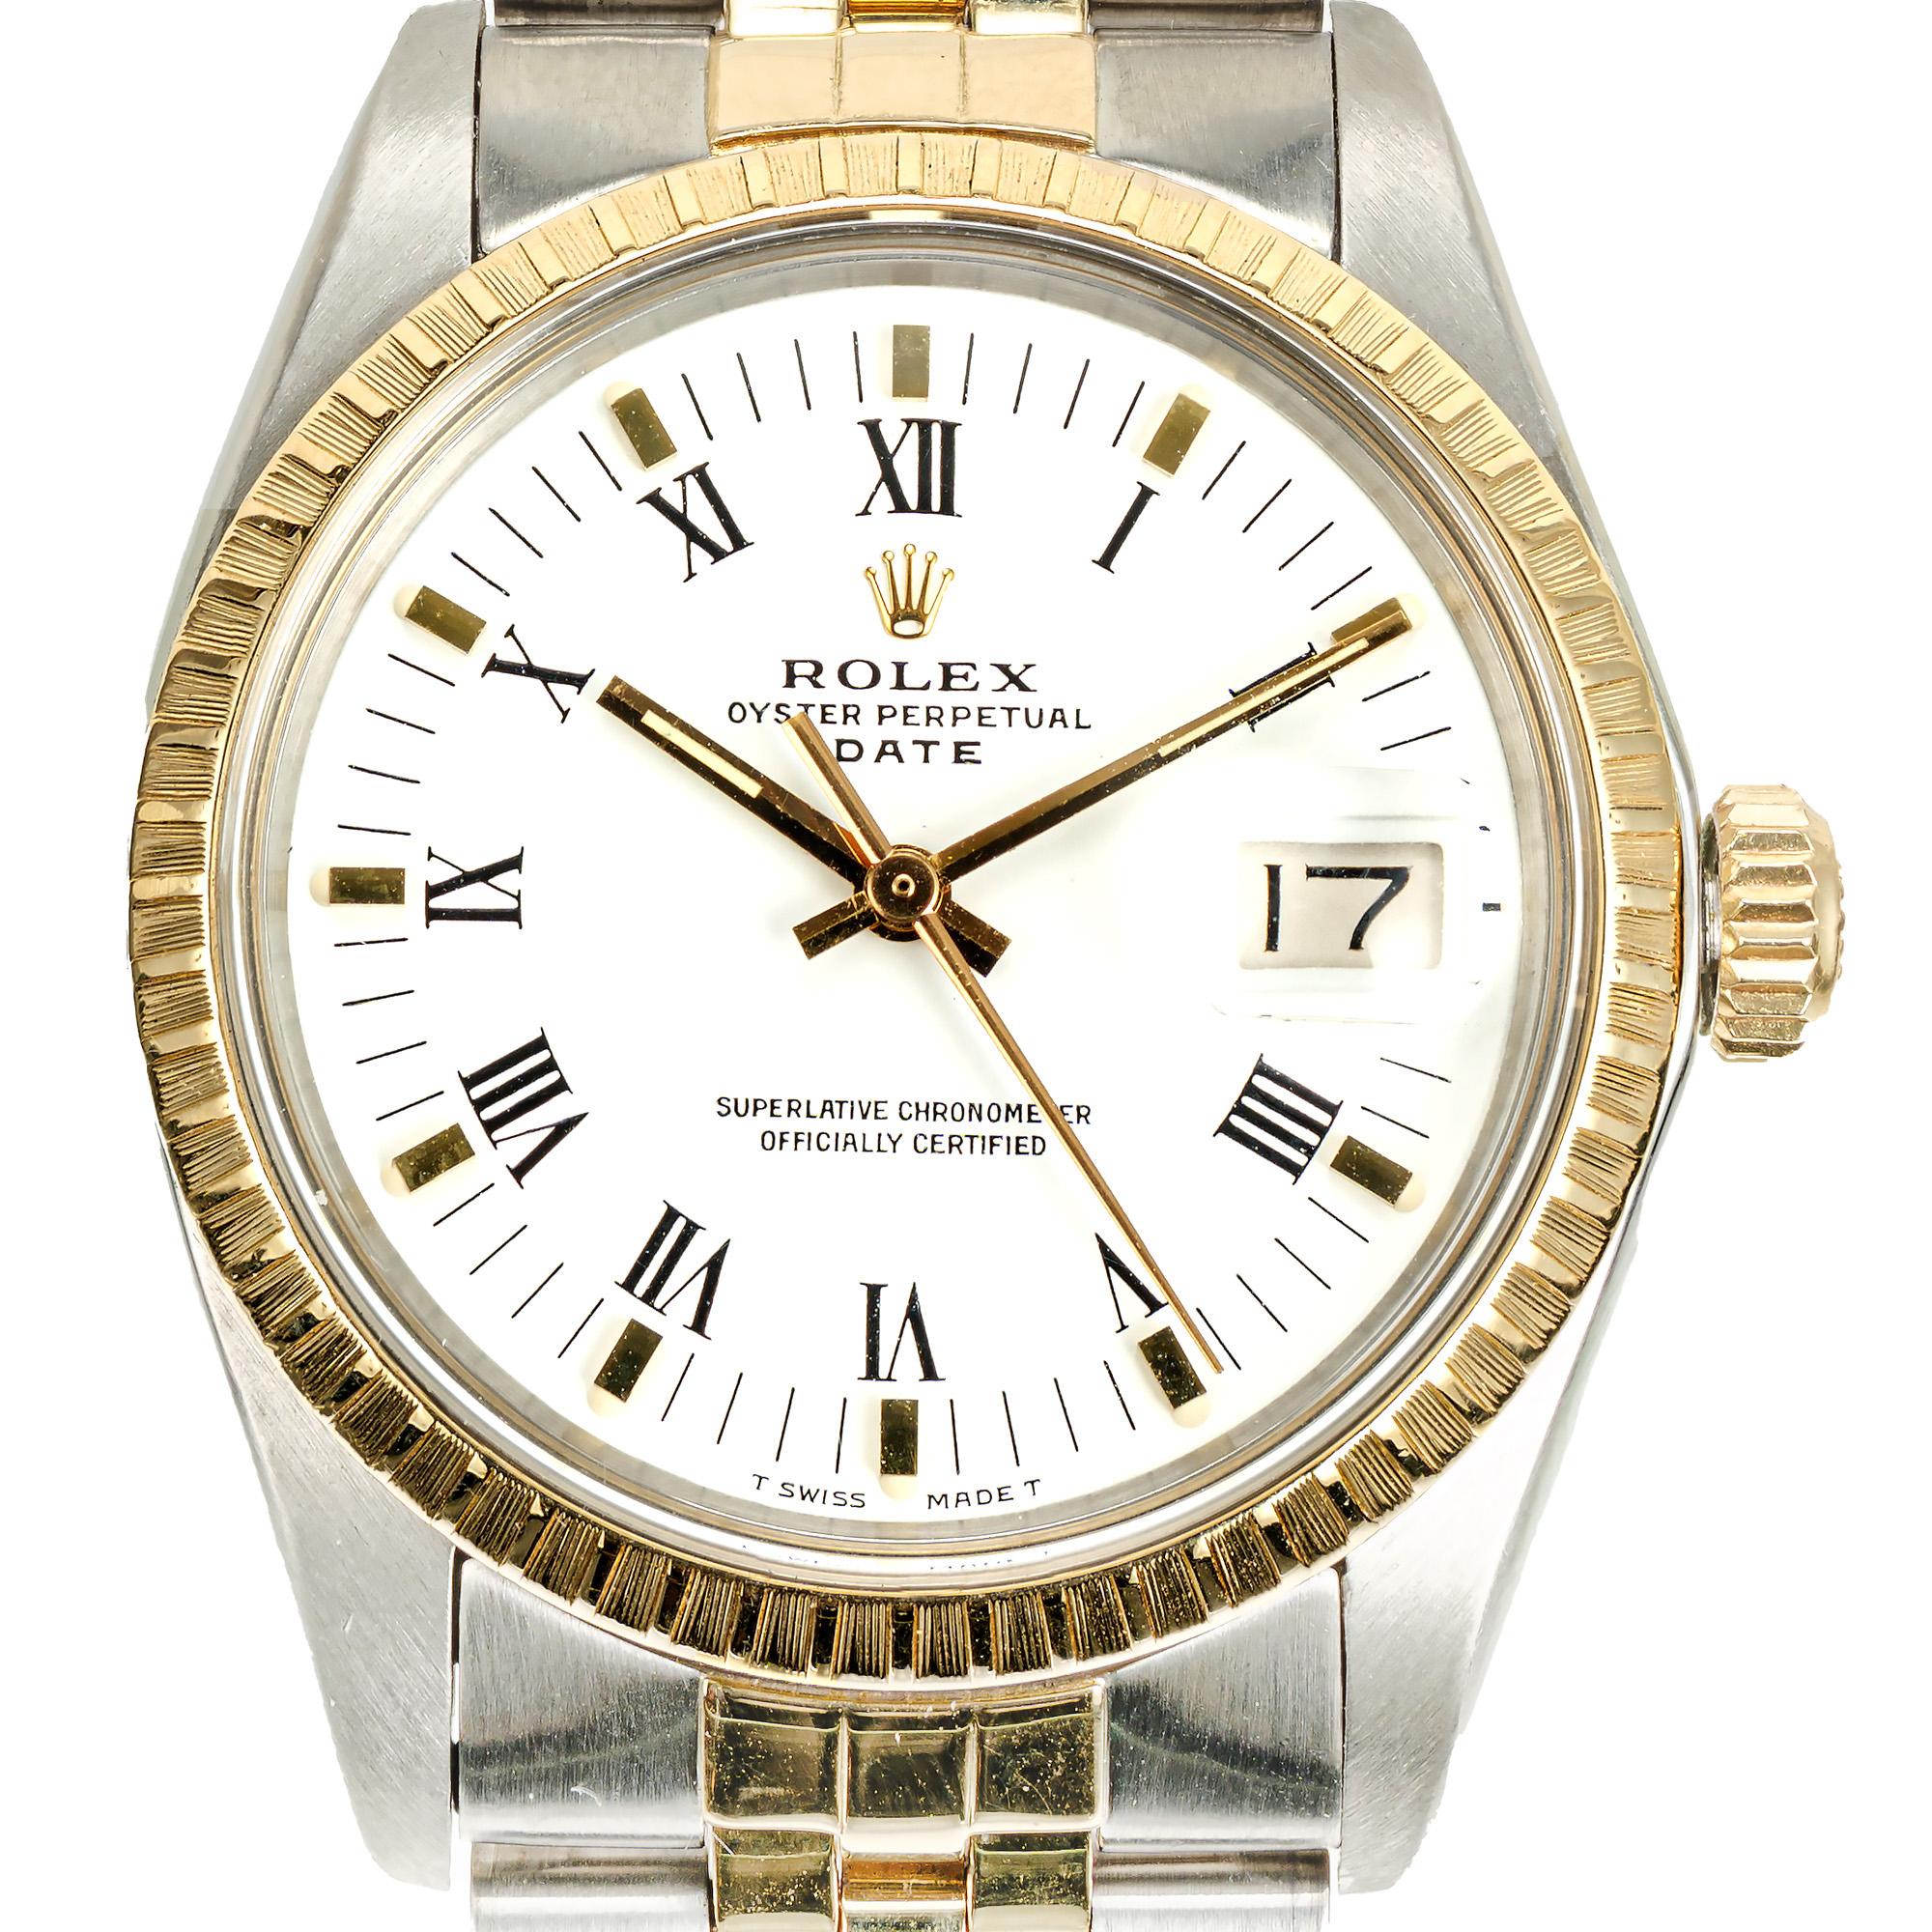 1977 original Rolex 1505, 14k yellow gold and steel wristwatch. Original white dial with roman numerals and raised gold cube markers. 8 inch jubilee band. Fully serviced with one year warranty.

Length: 42mm
Width: 34mm
Band width at case: 19mm
Case